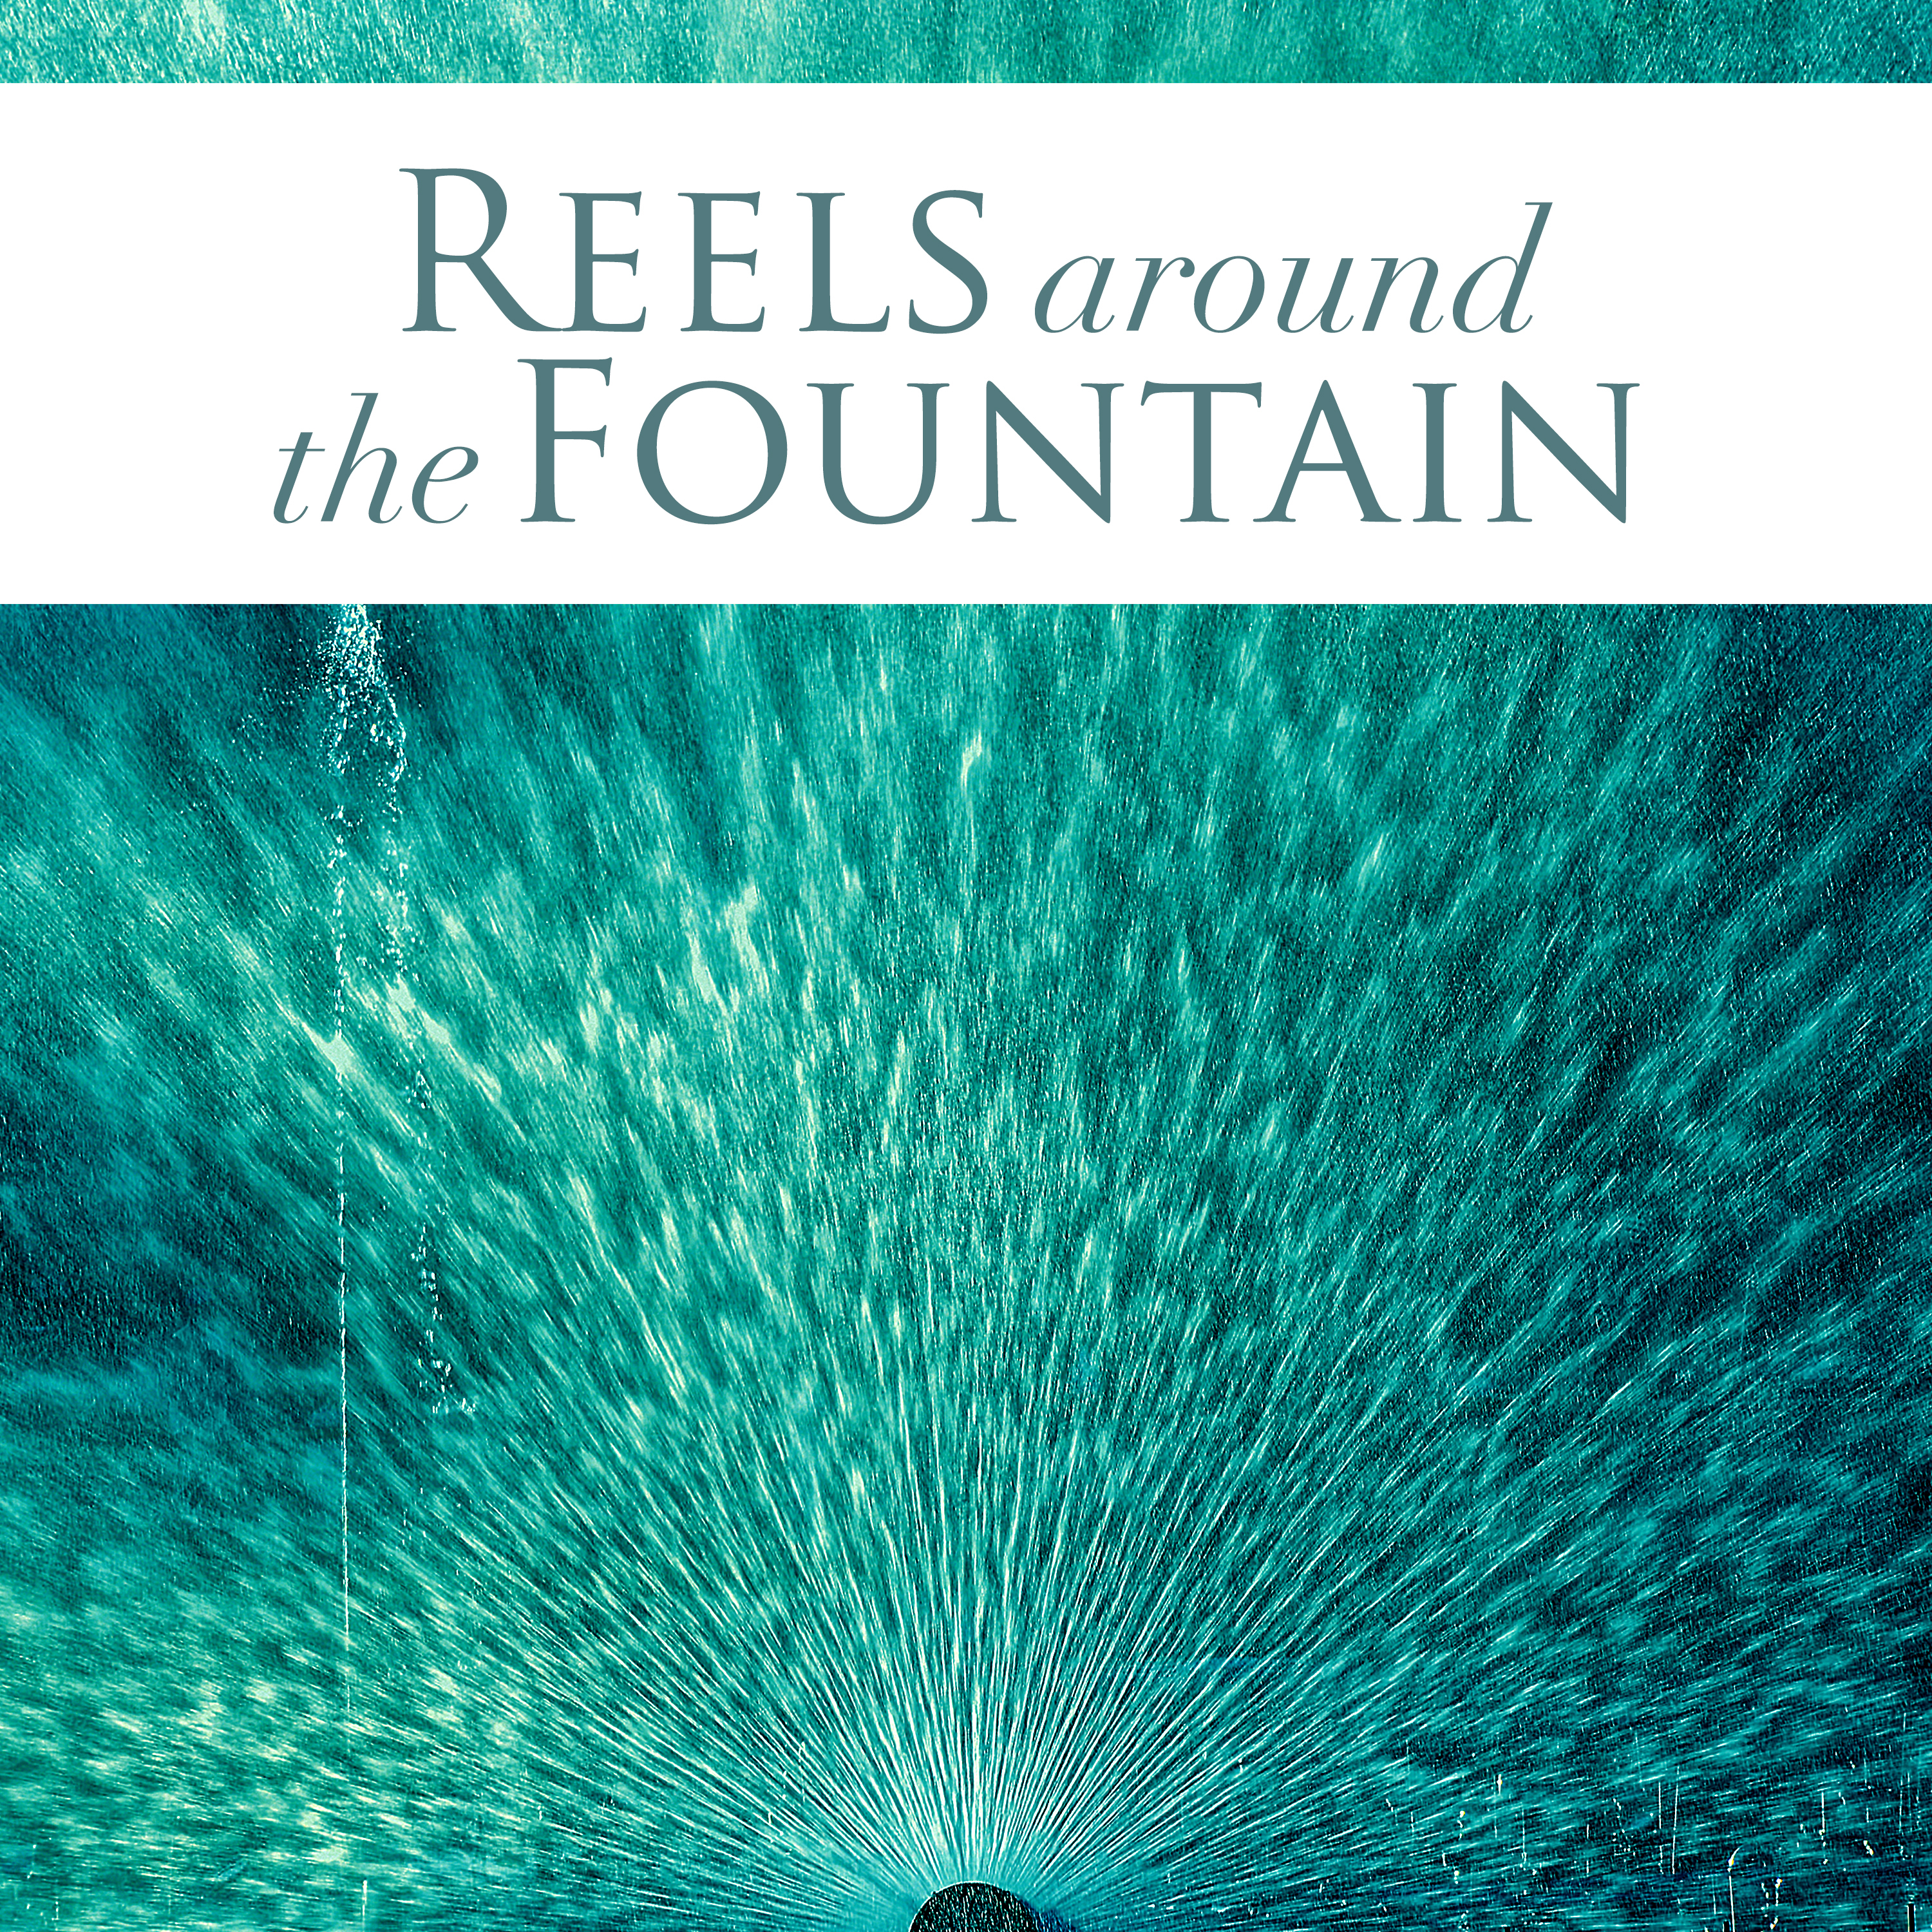 Reels Around the Fountain